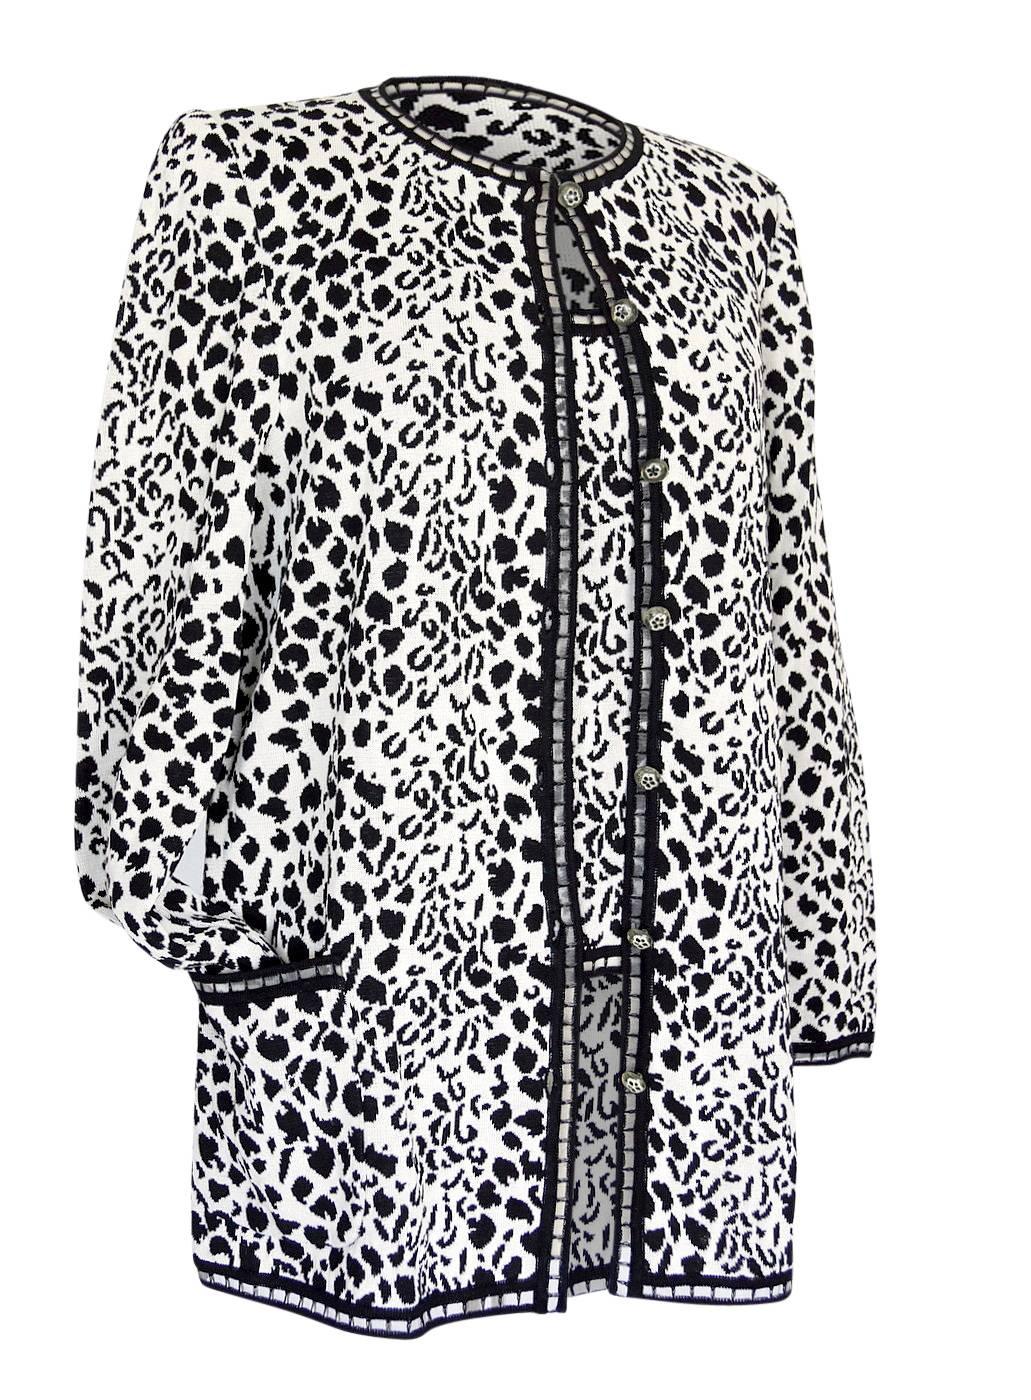 Guaranteed authentic Emanuel Ungaro timless classic sweater set in a wonderful black and white animal print with fabulous, delicate detailing!
Perfect Spring Summer weight.
The shell and cardigan are edged out in a lovely 3/4